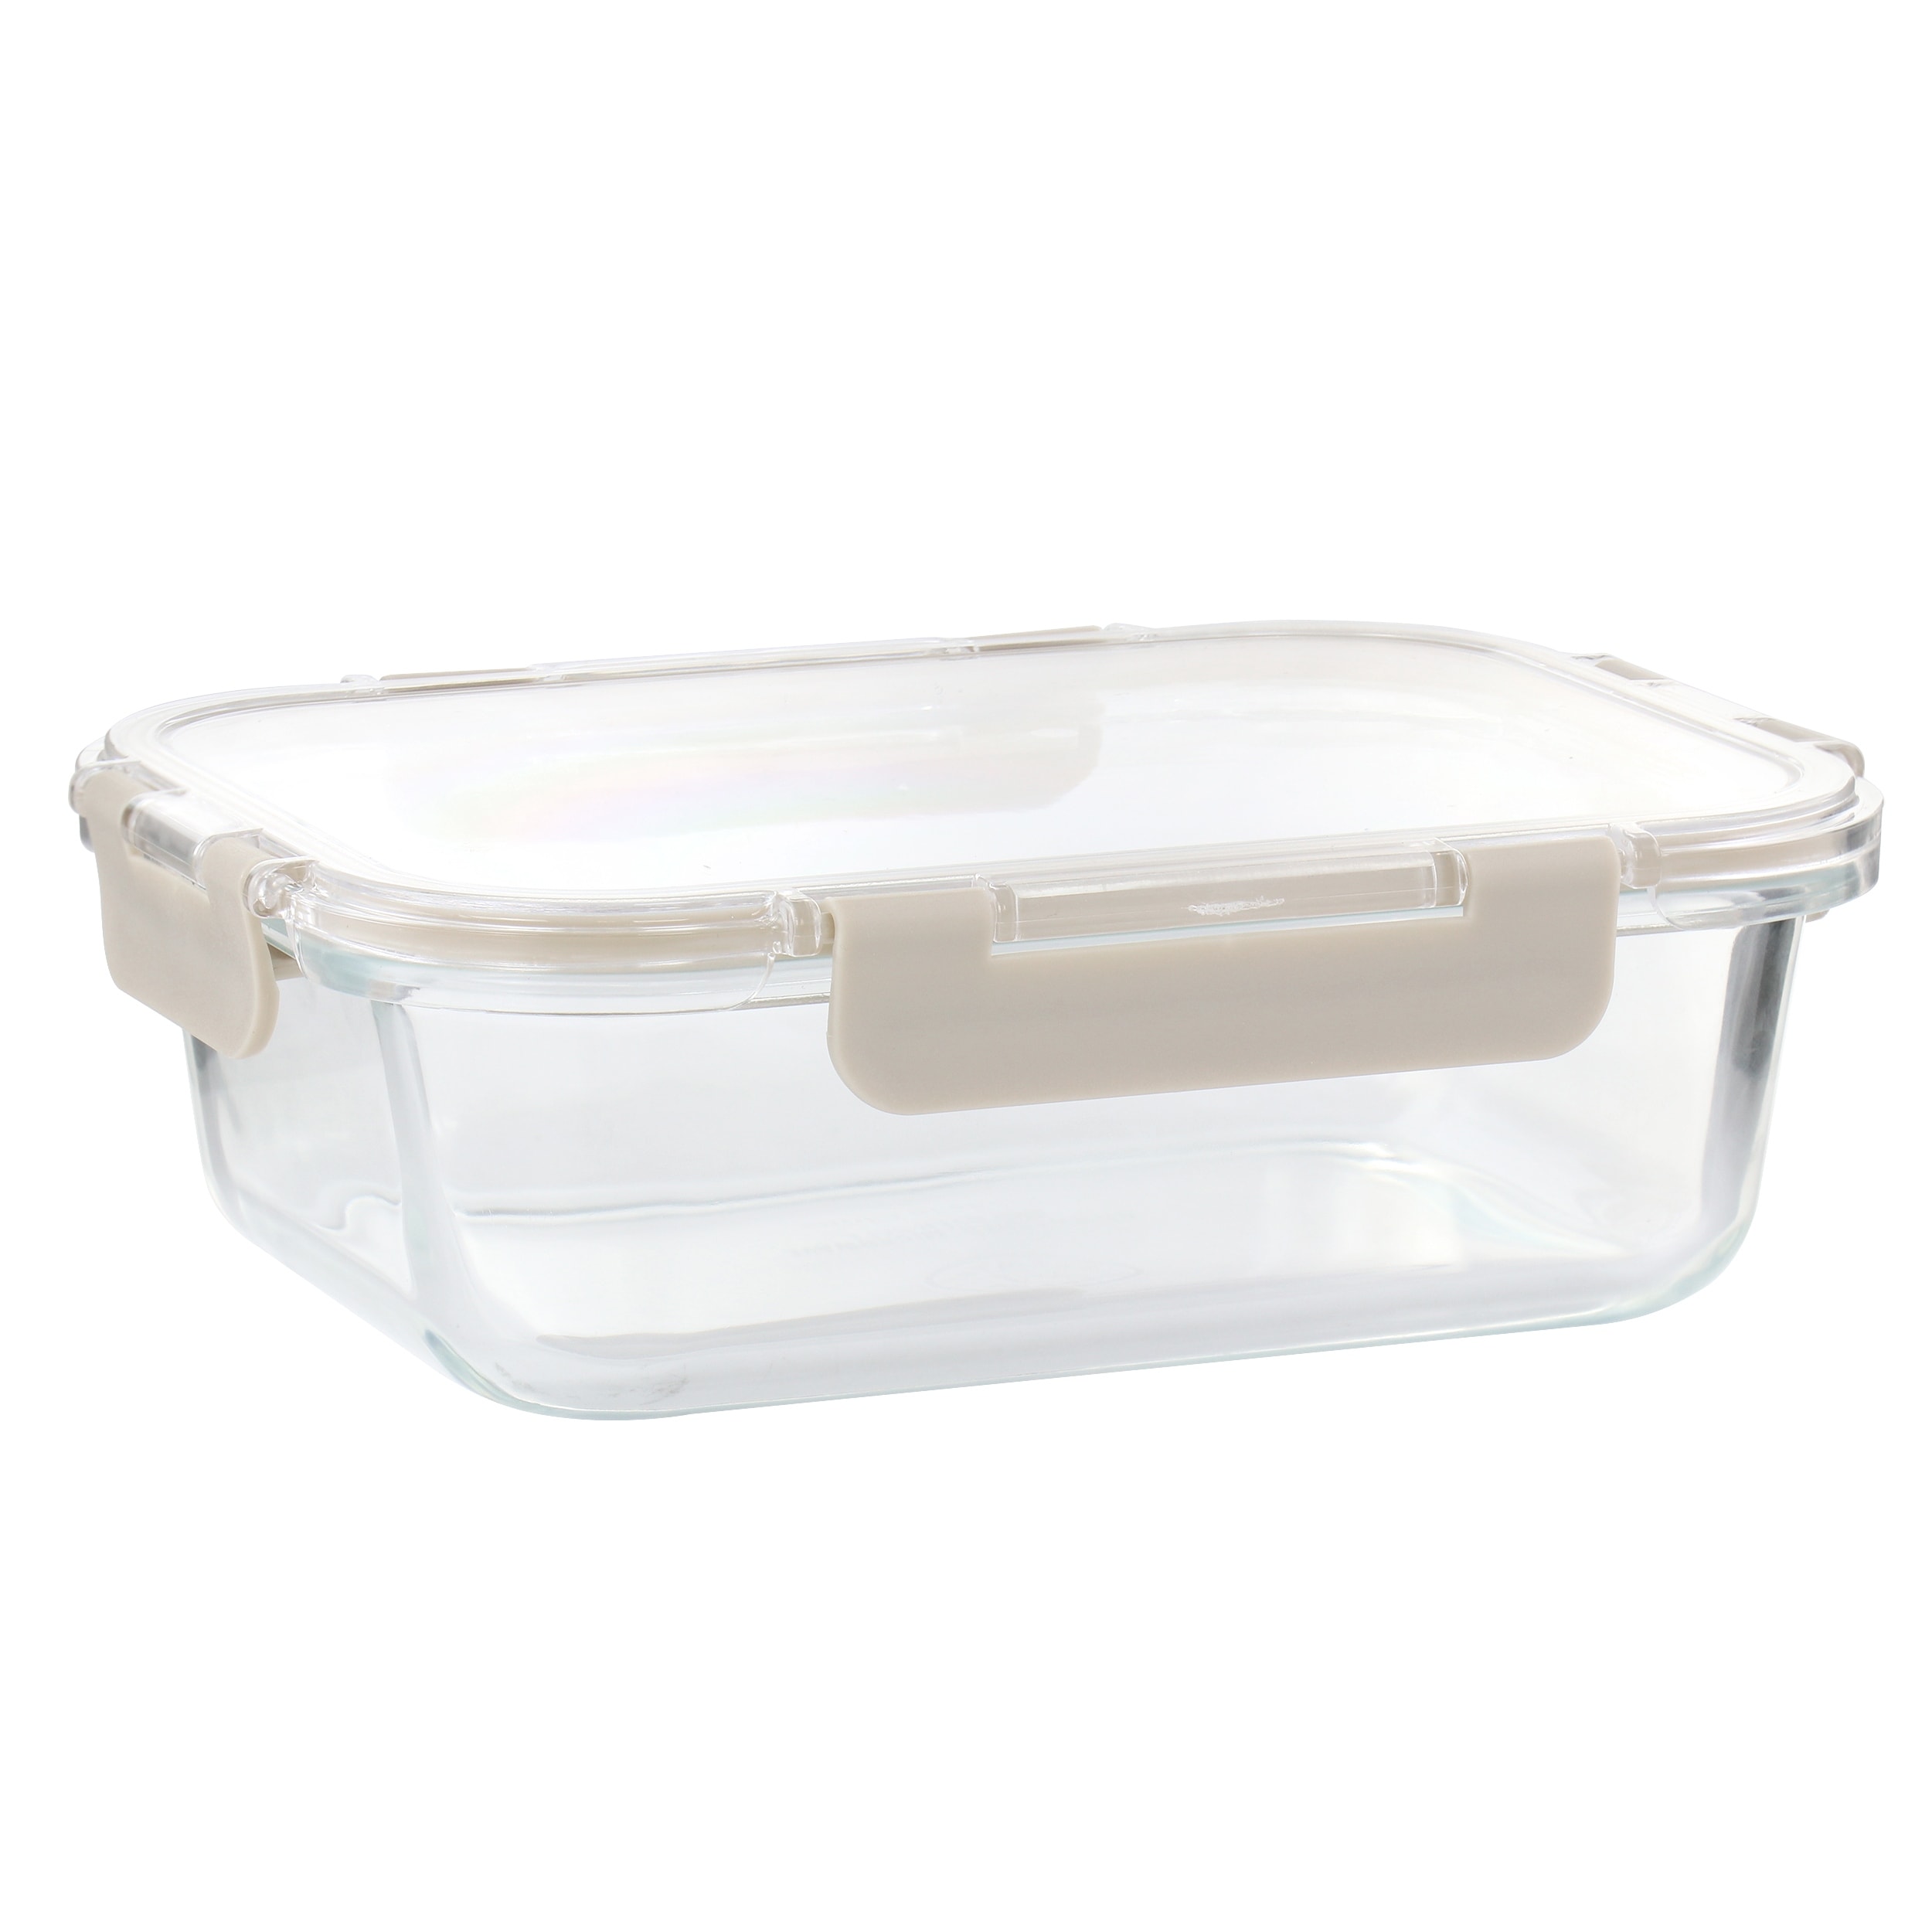 https://ak1.ostkcdn.com/images/products/is/images/direct/ff765a969d859e67f5417f16fb60855c6f740709/35-Ounce-Rectangular-Glass-Container-with-Snap-On-Lid.jpg